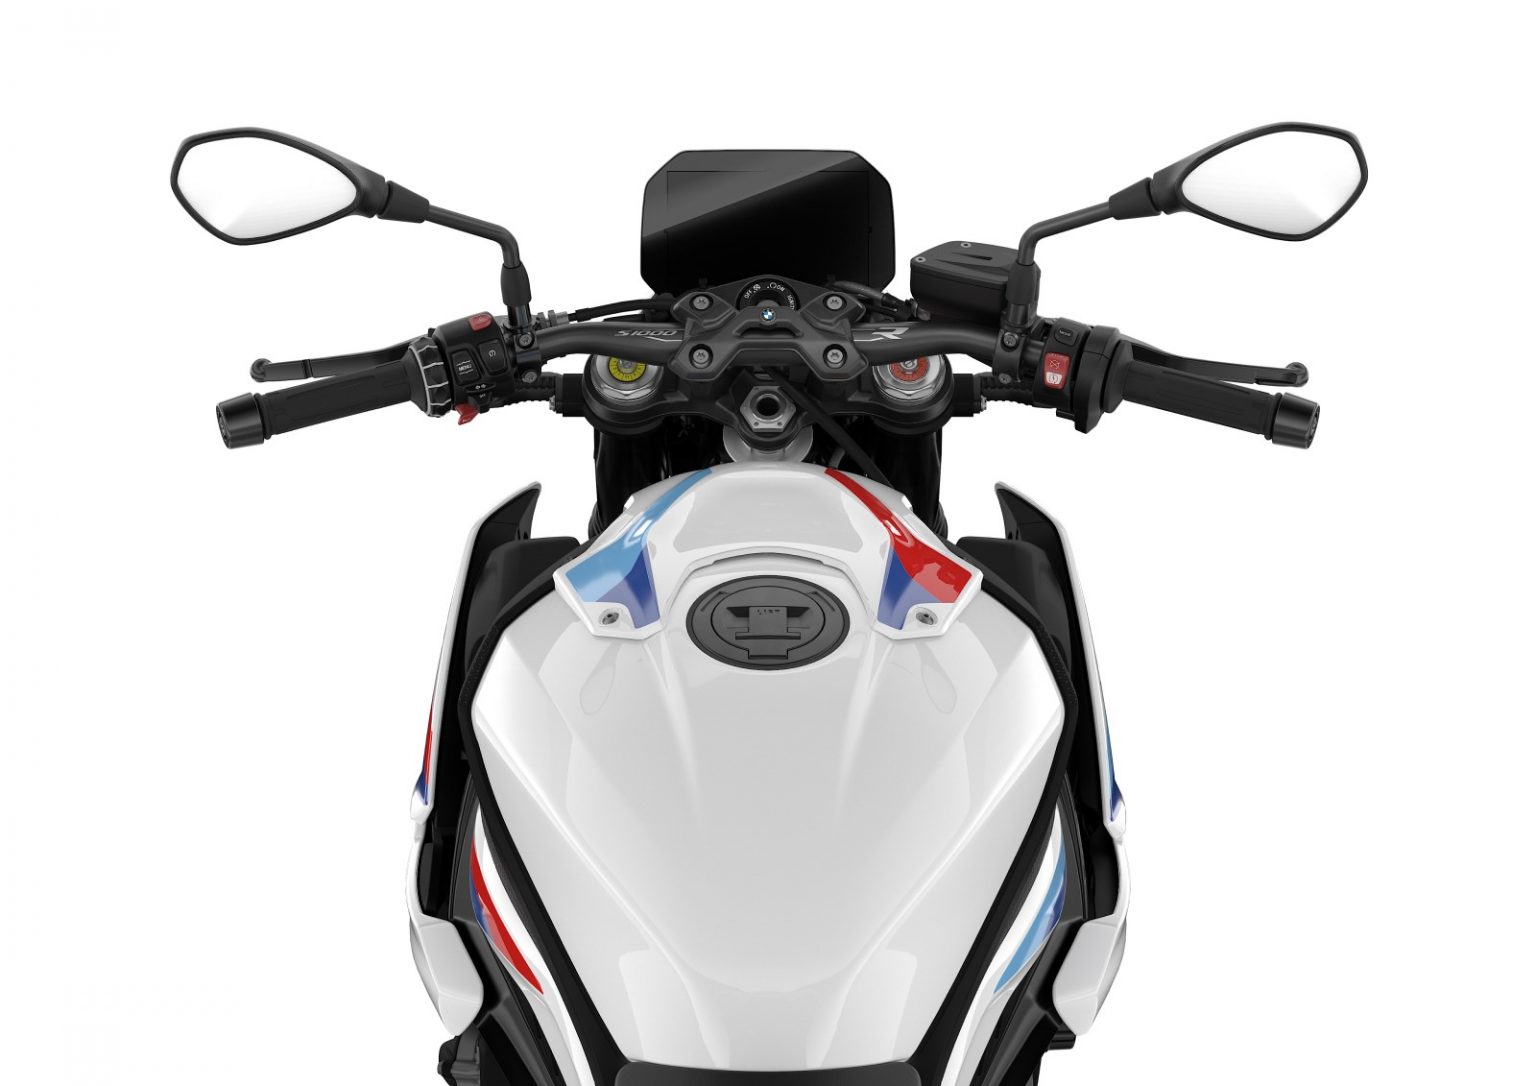 BMW S 1000 R, the naked sporty features will now be even lighter and more technological